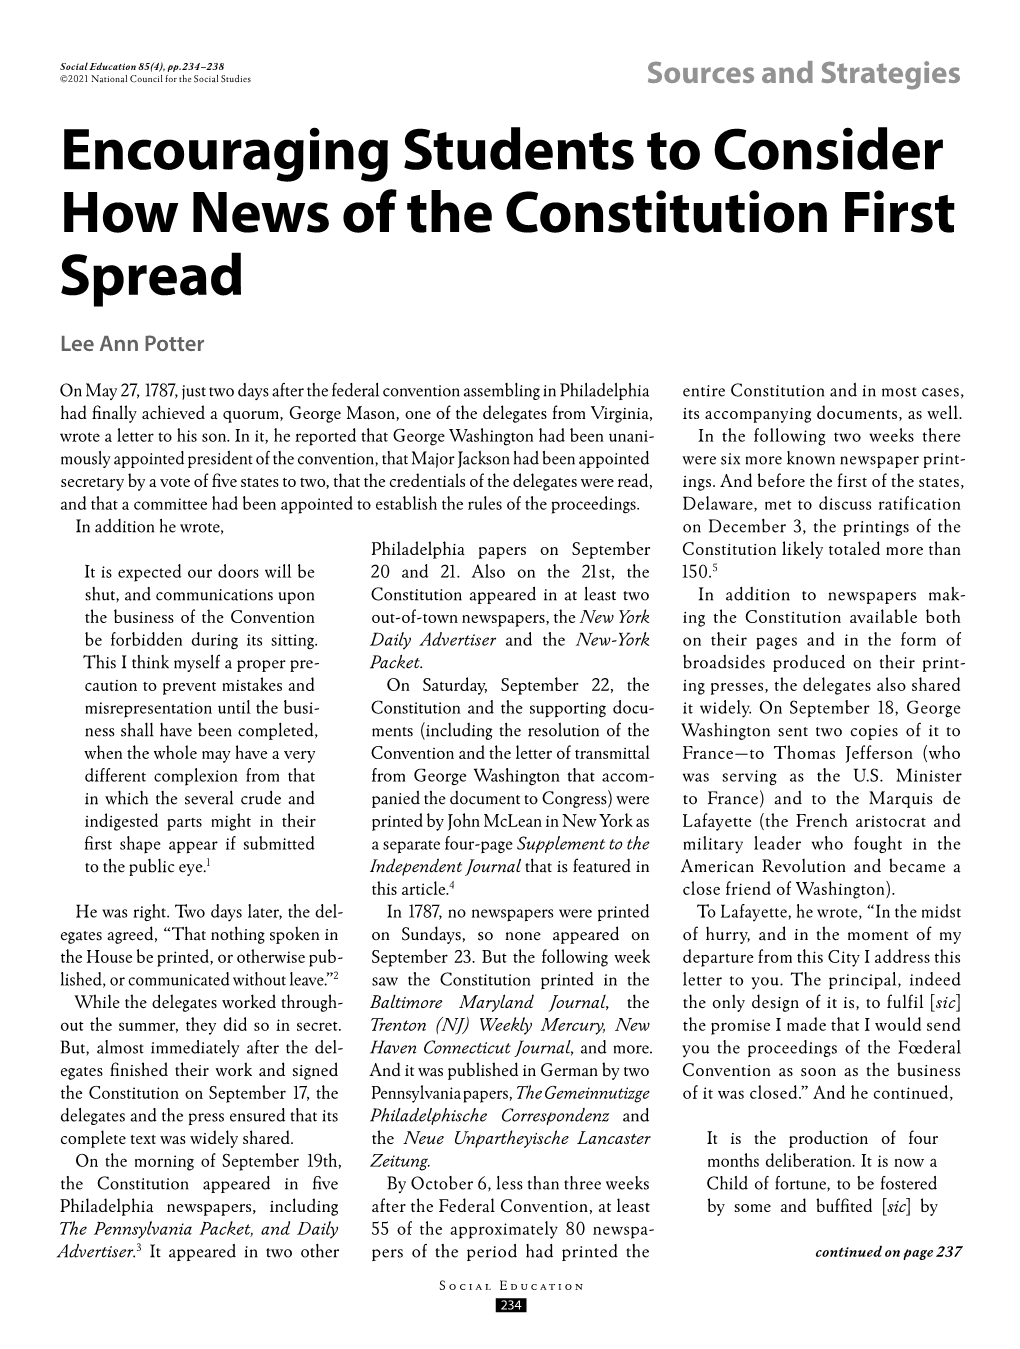 Encouraging Students to Consider How News of the Constitution First Spread